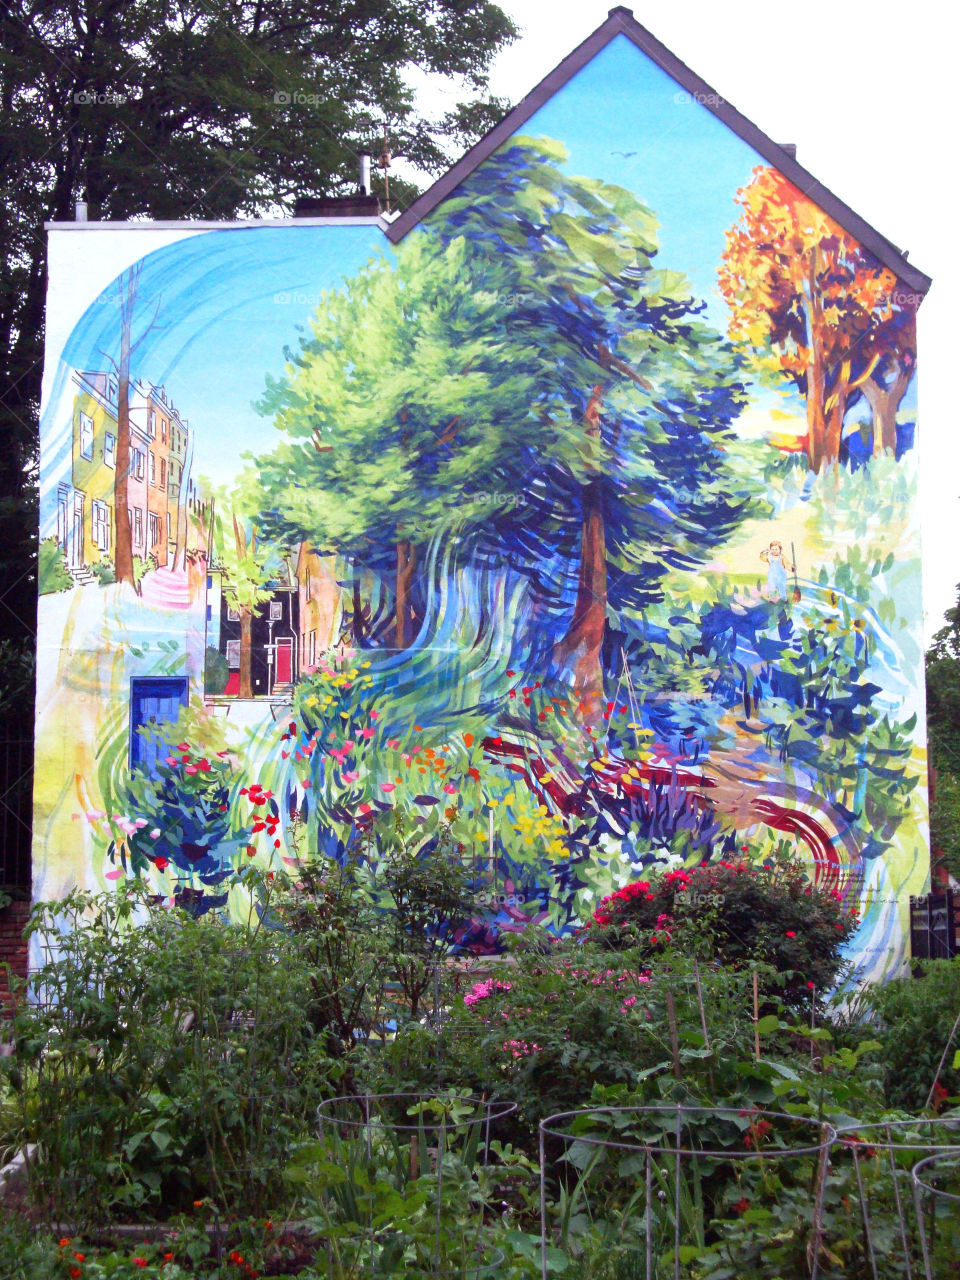 Jardin. Philadelphia is the city of murals, and this one is one of my favorites!